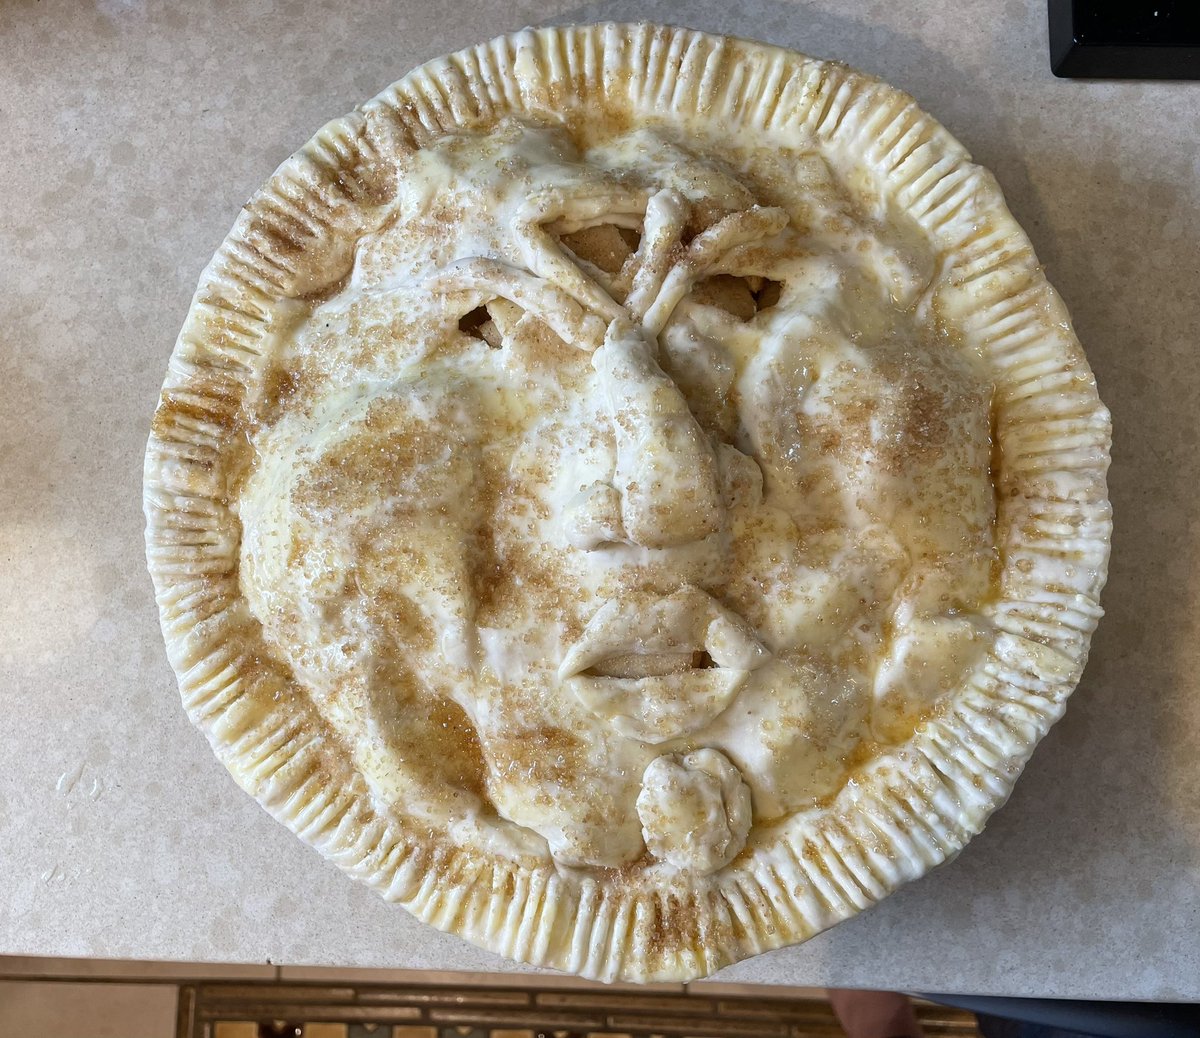 hello i’m making an apple pie that looks like Dagoth Ur from Morrowind, check back in like ~75min to see how he comes out 😭😭